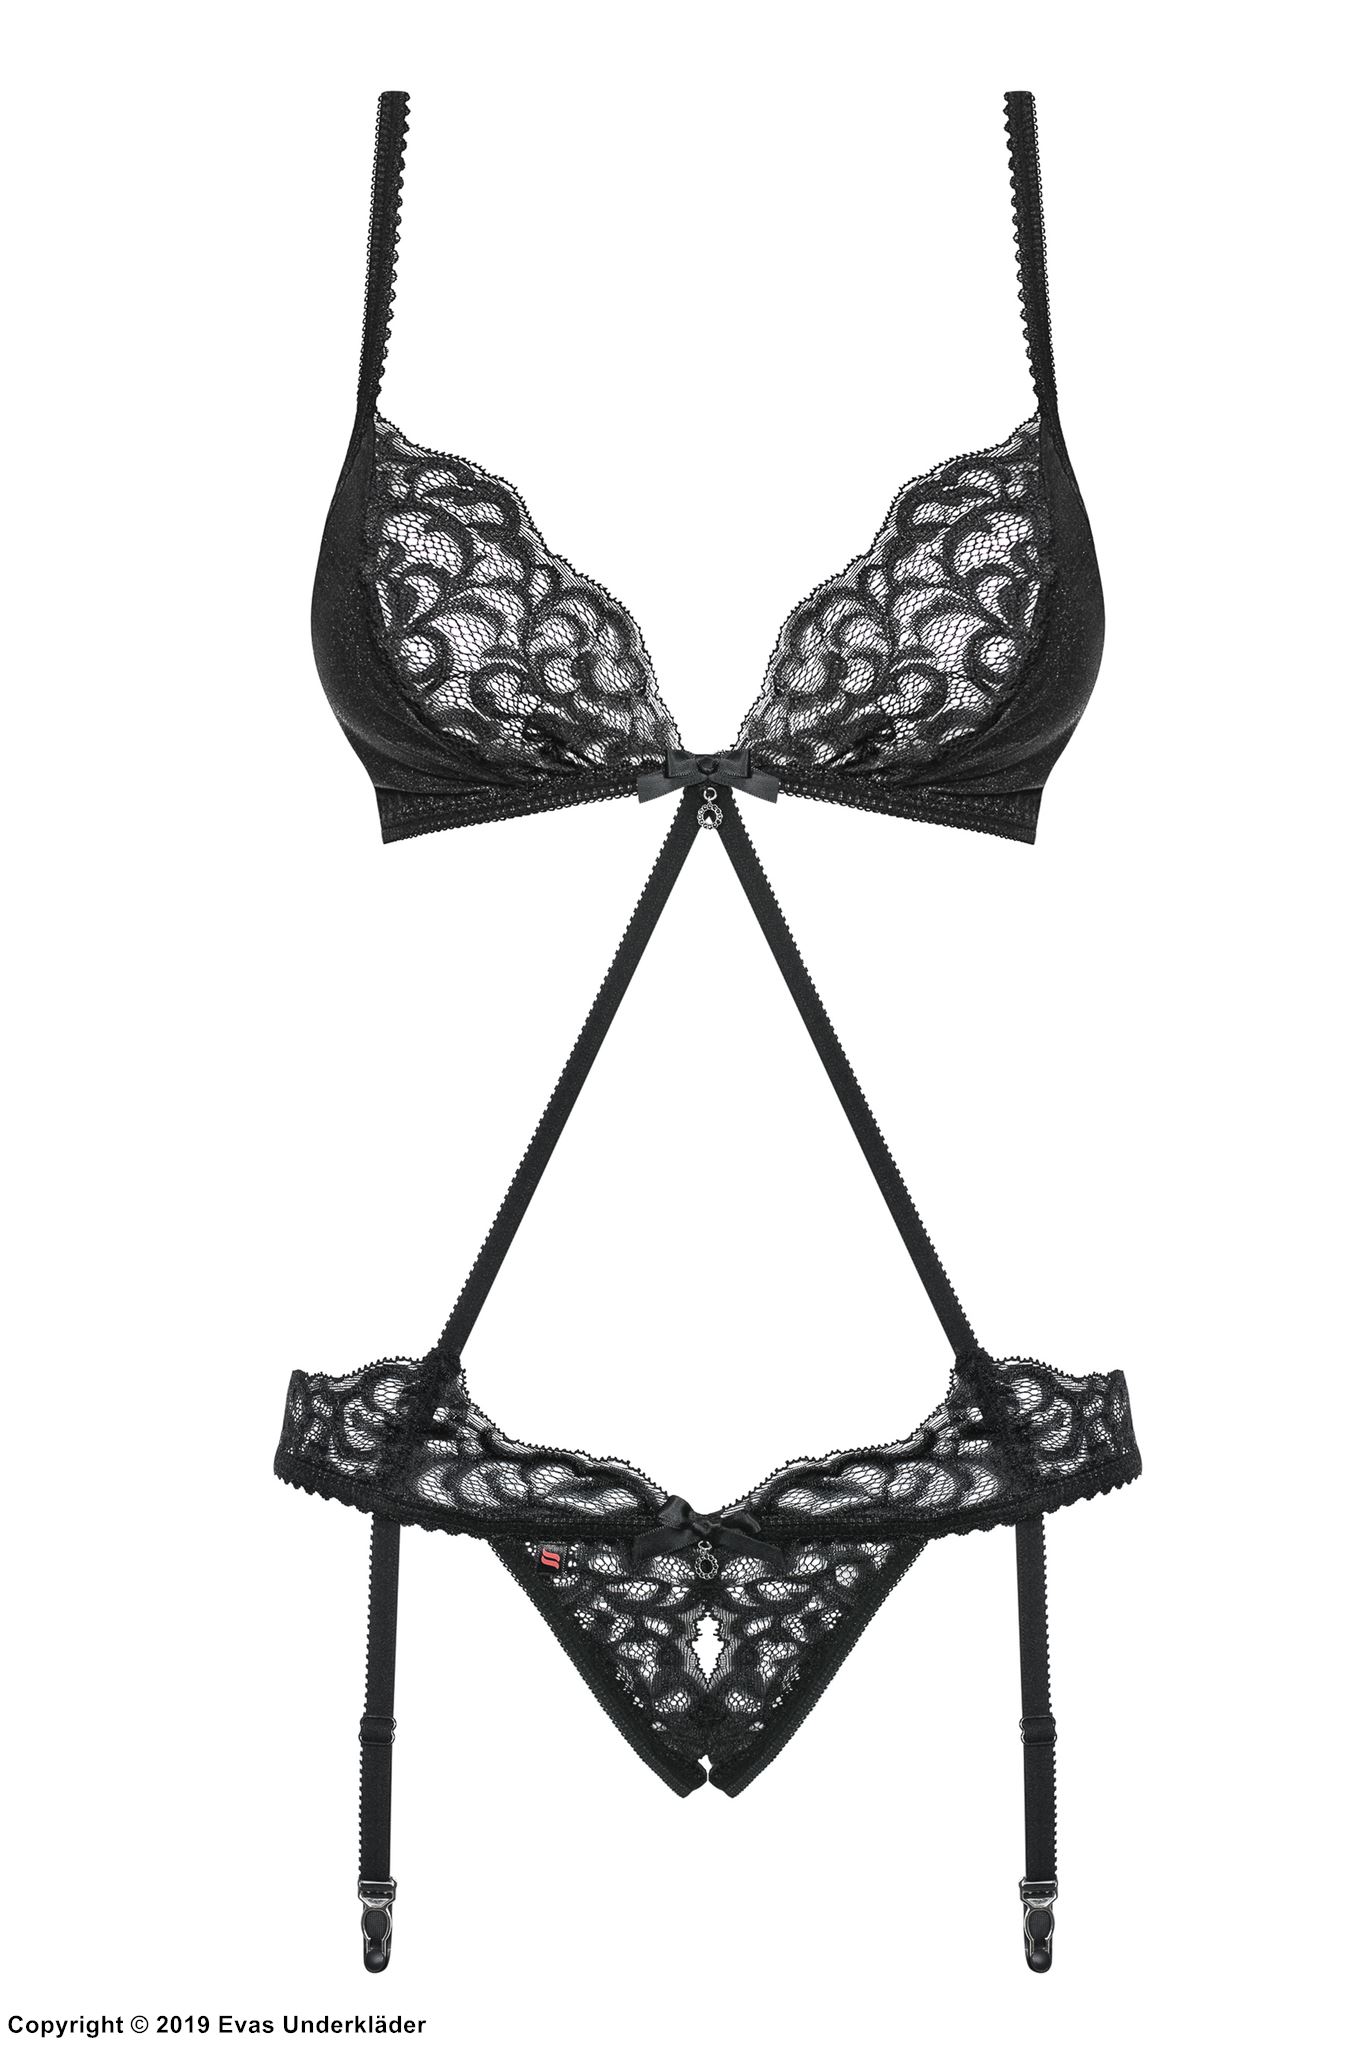 Sexy lingerie set, open crotch, thin straps, lace inlays